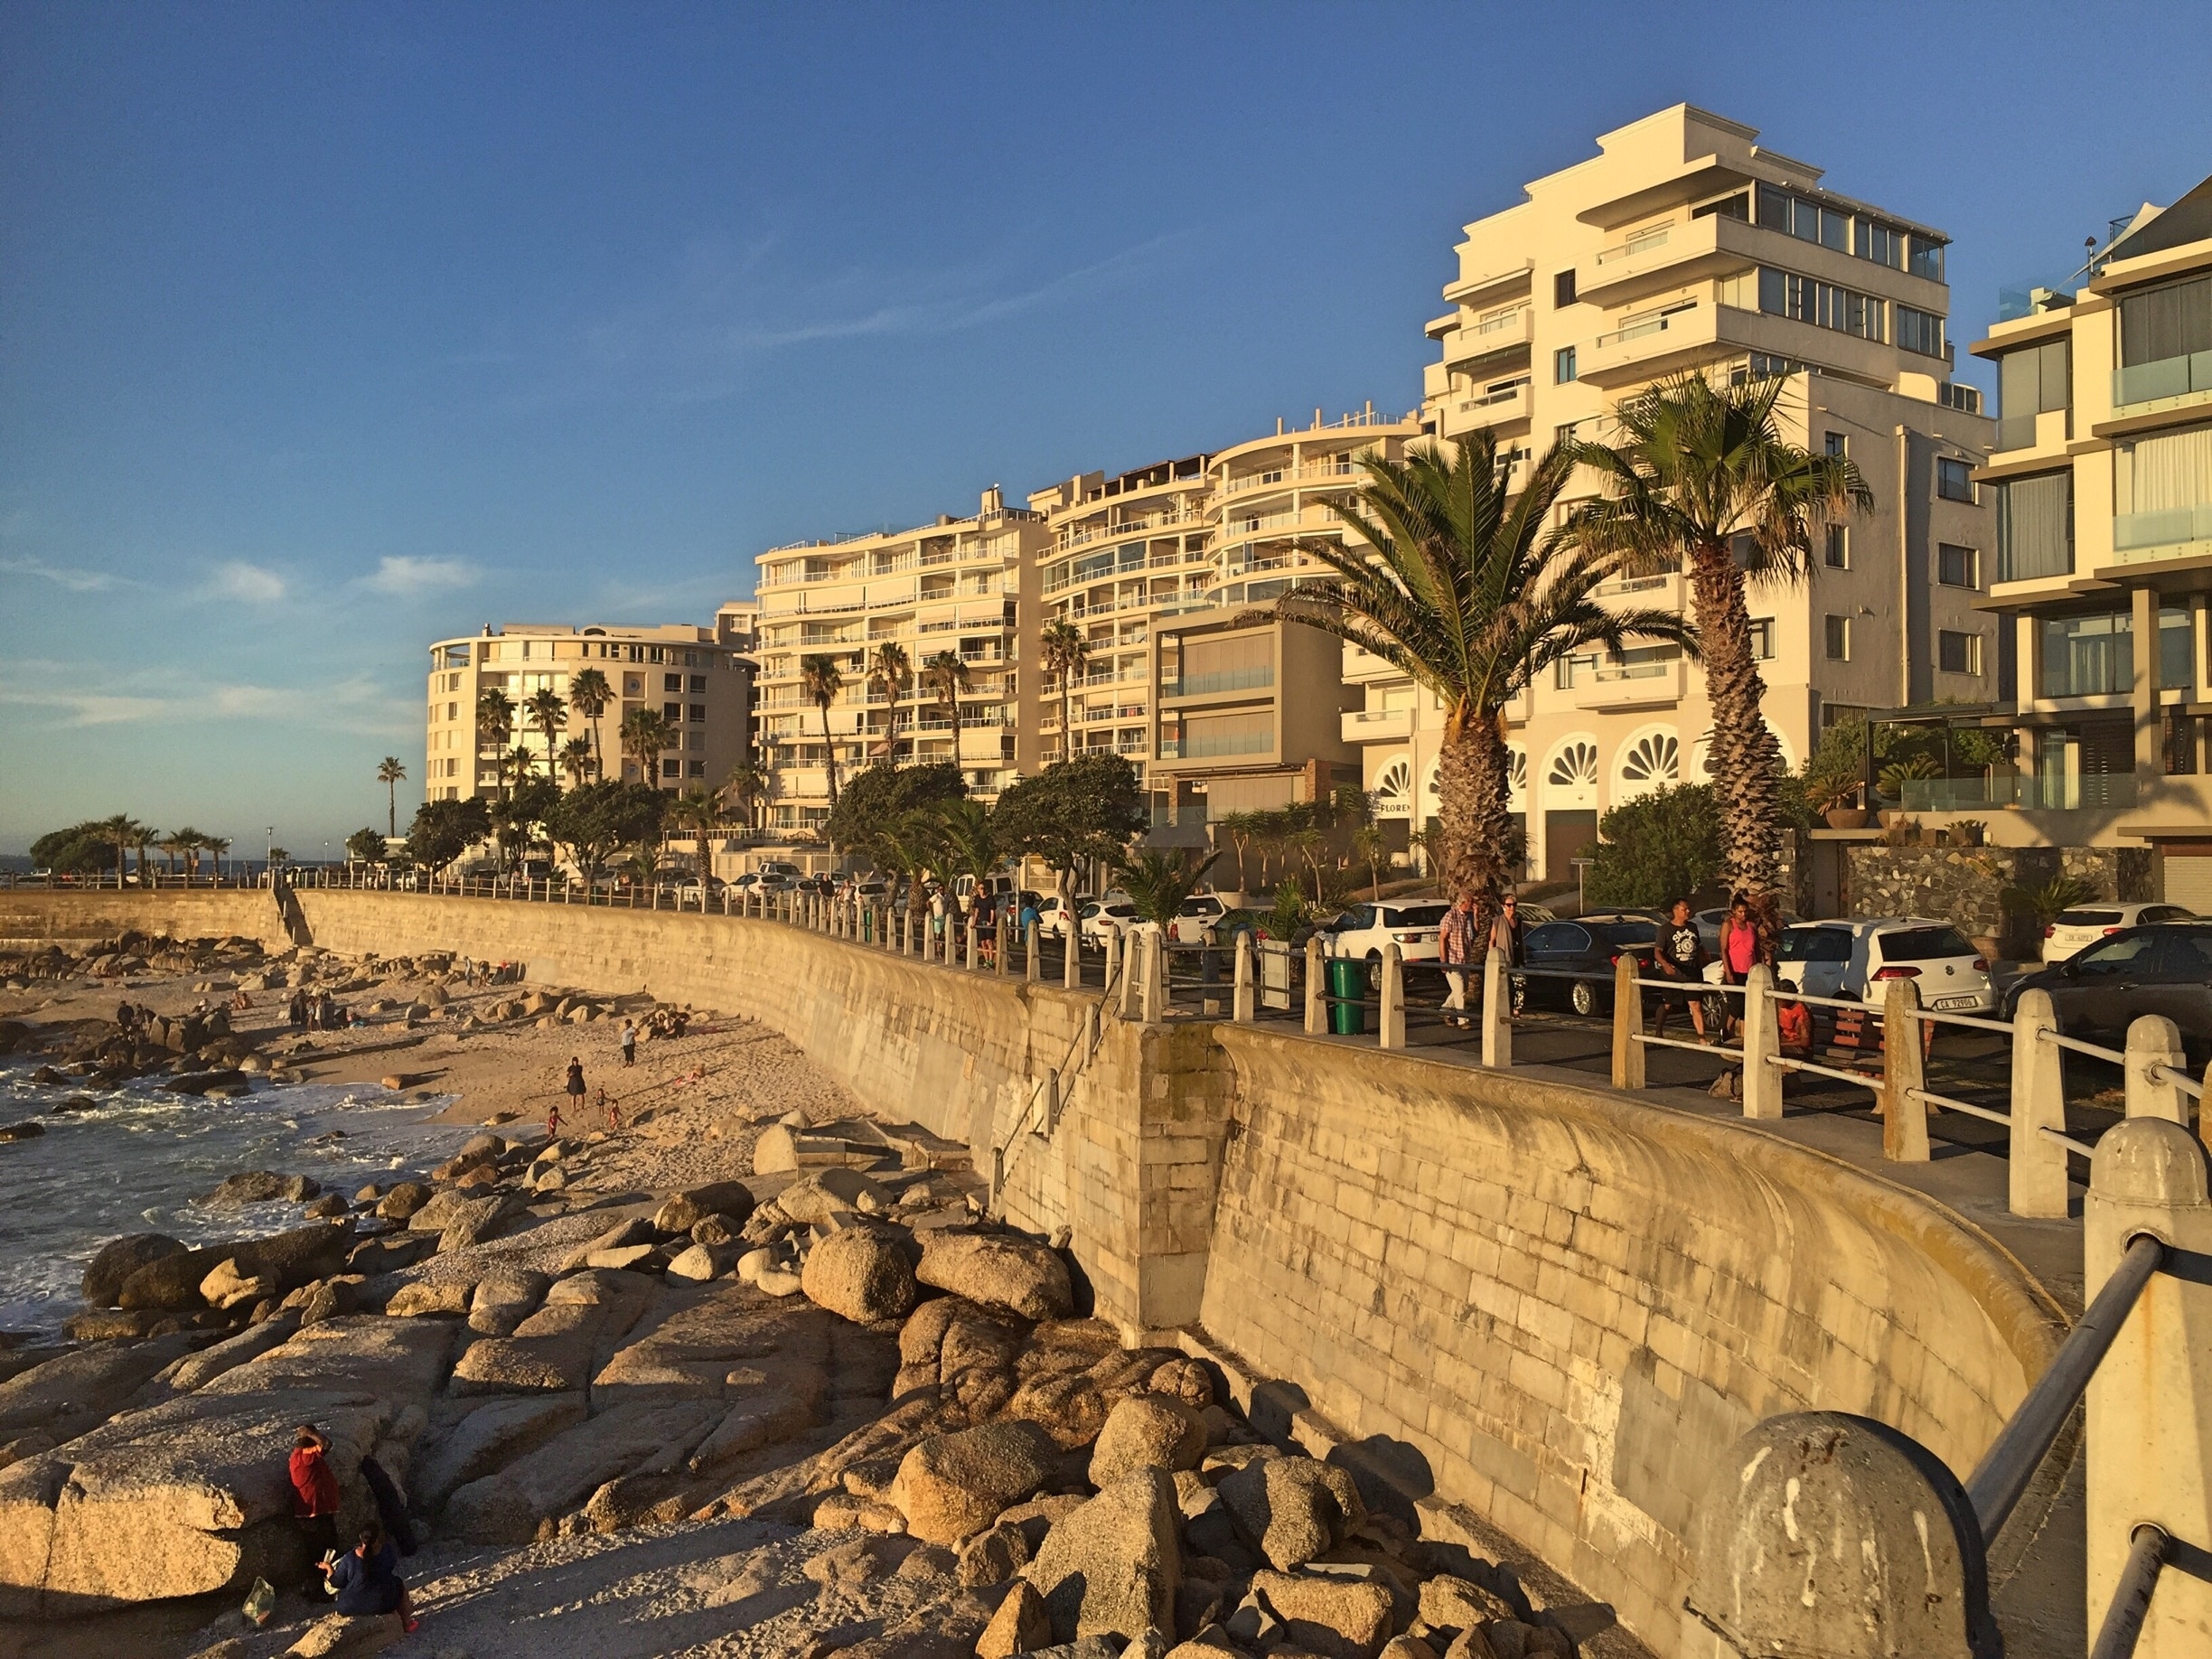 The boardwalk along Sea Point allows for great overlooks of the sea and little beaches. Scenic place for a stroll. #aboveitall #architecture #capetown